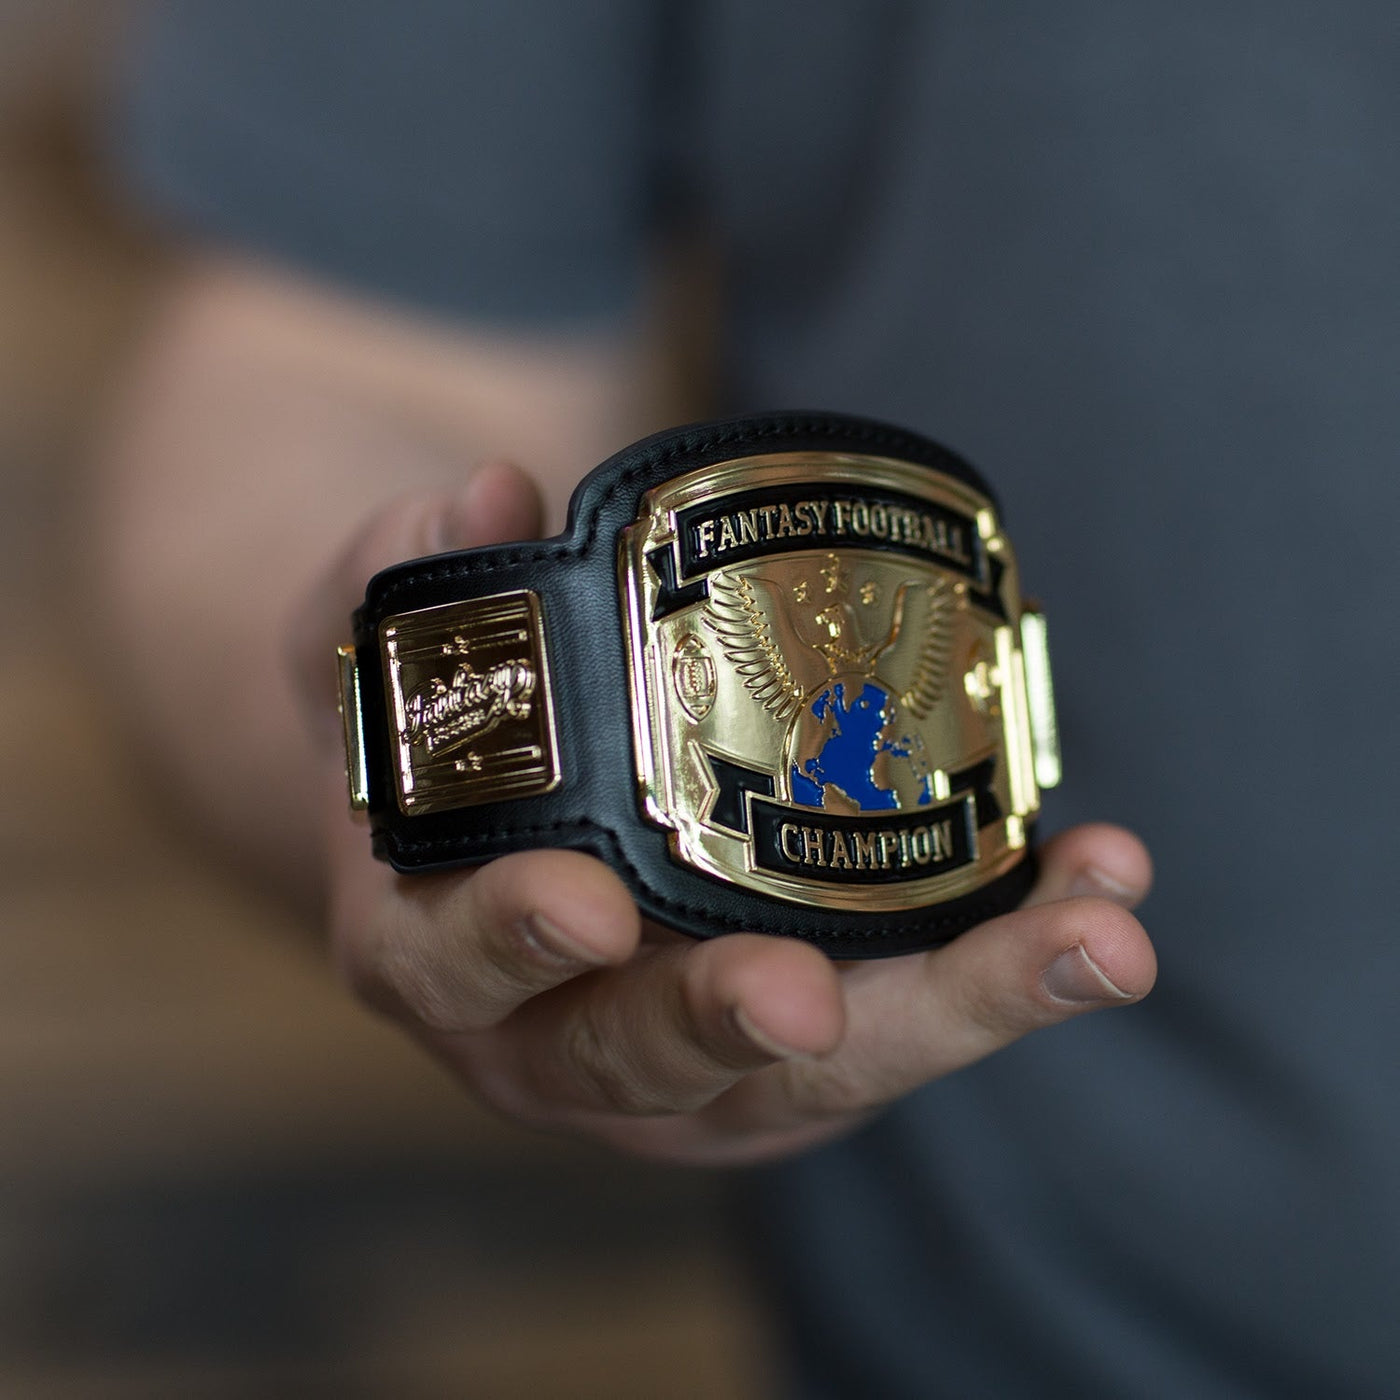 Championship Belt Replicas - What You Need To Know